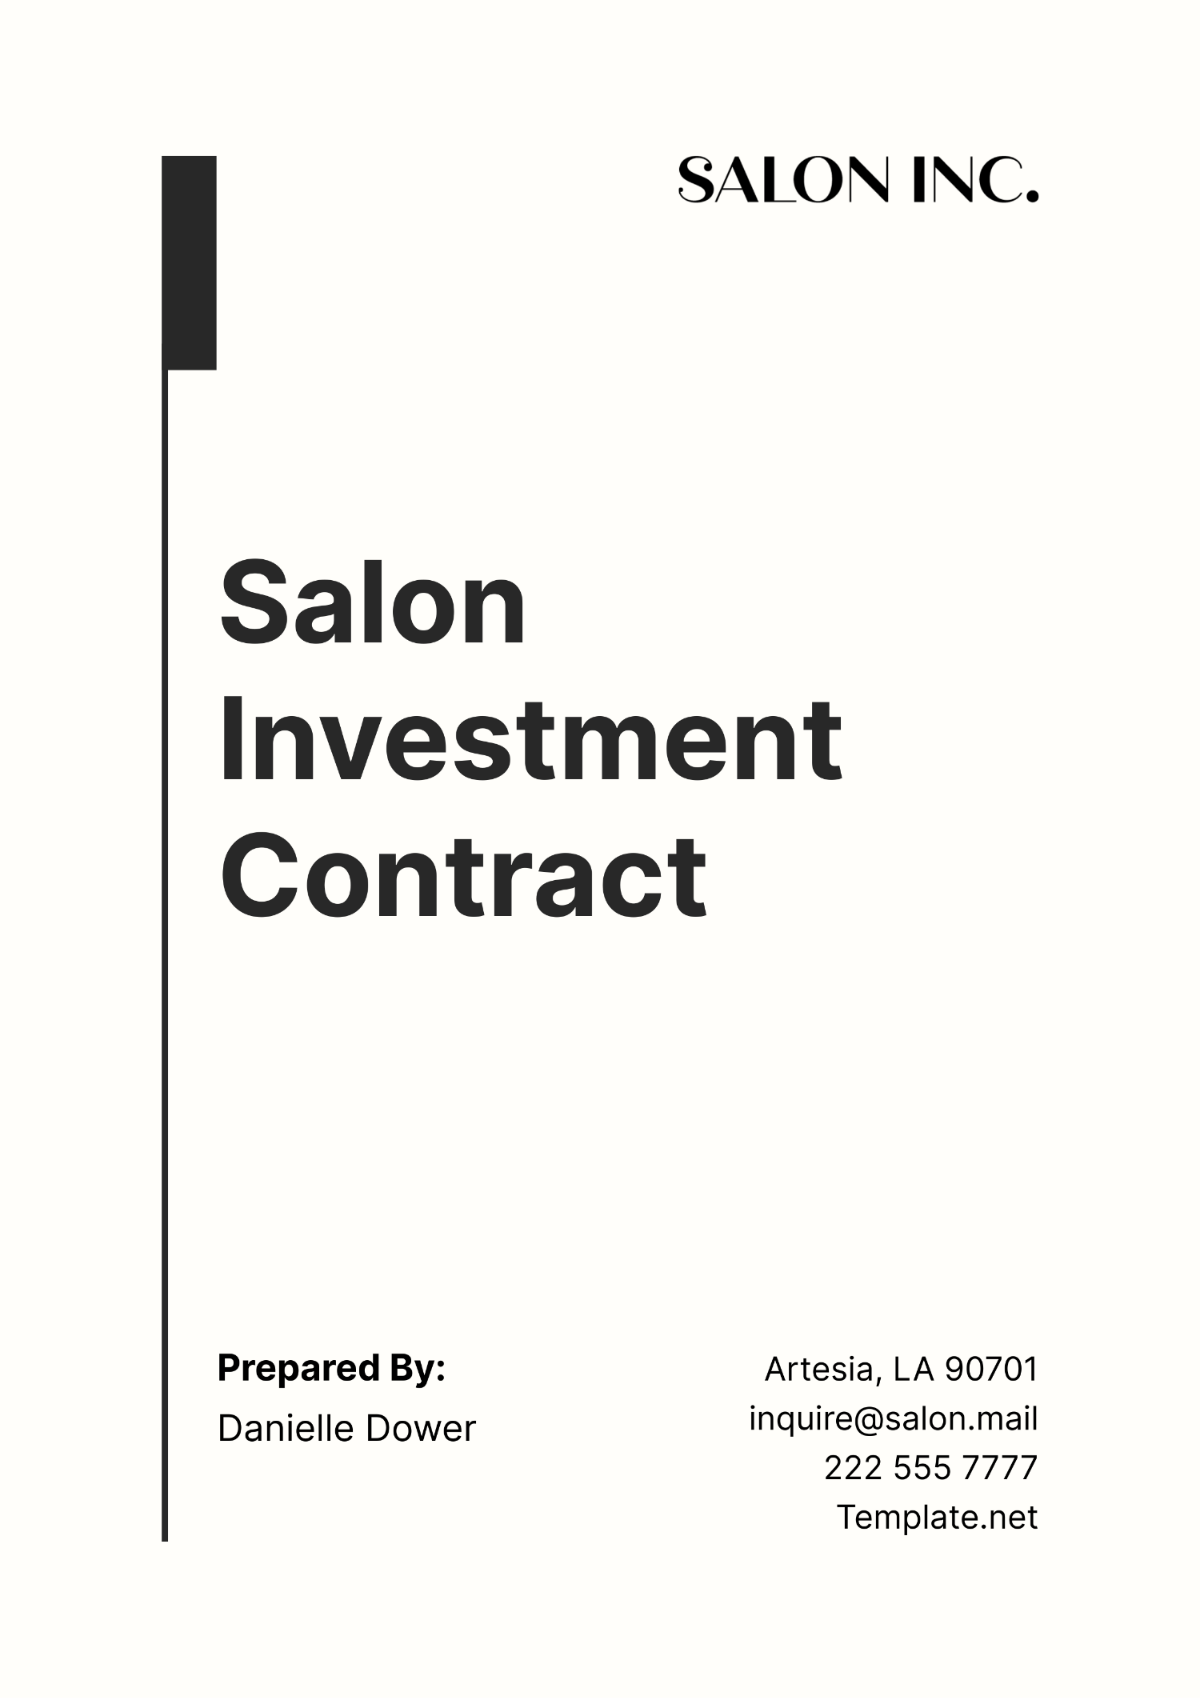 Salon Investment Contract Template